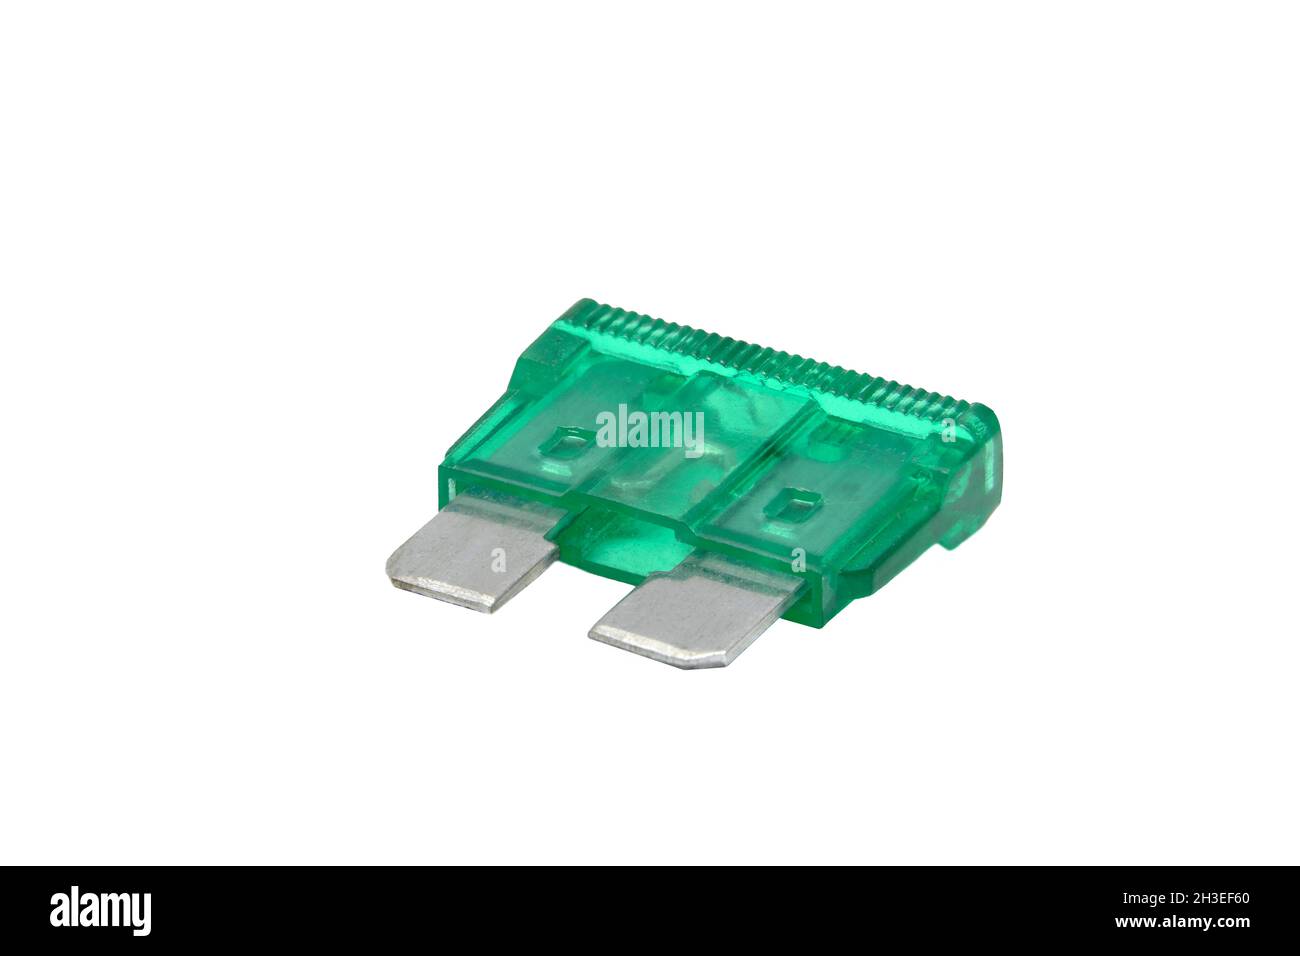 Vehicle auto blade fuse and used blade fuse. Isolated on white background. Concept of automobile electrical repair Stock Photo